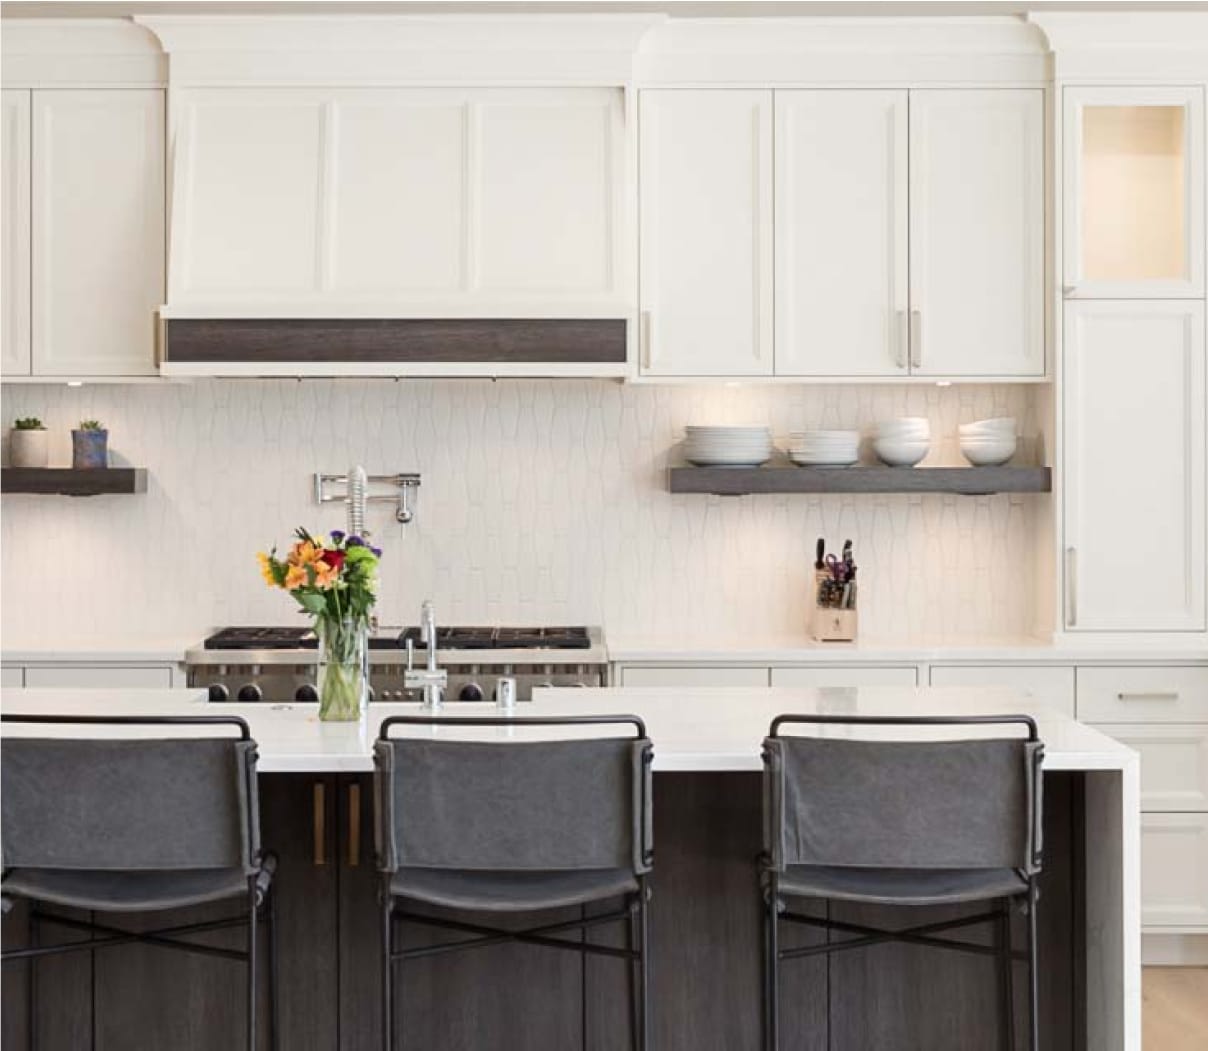 Remodeled kitchen with white cabinetry, white bar-height countertop and black stools